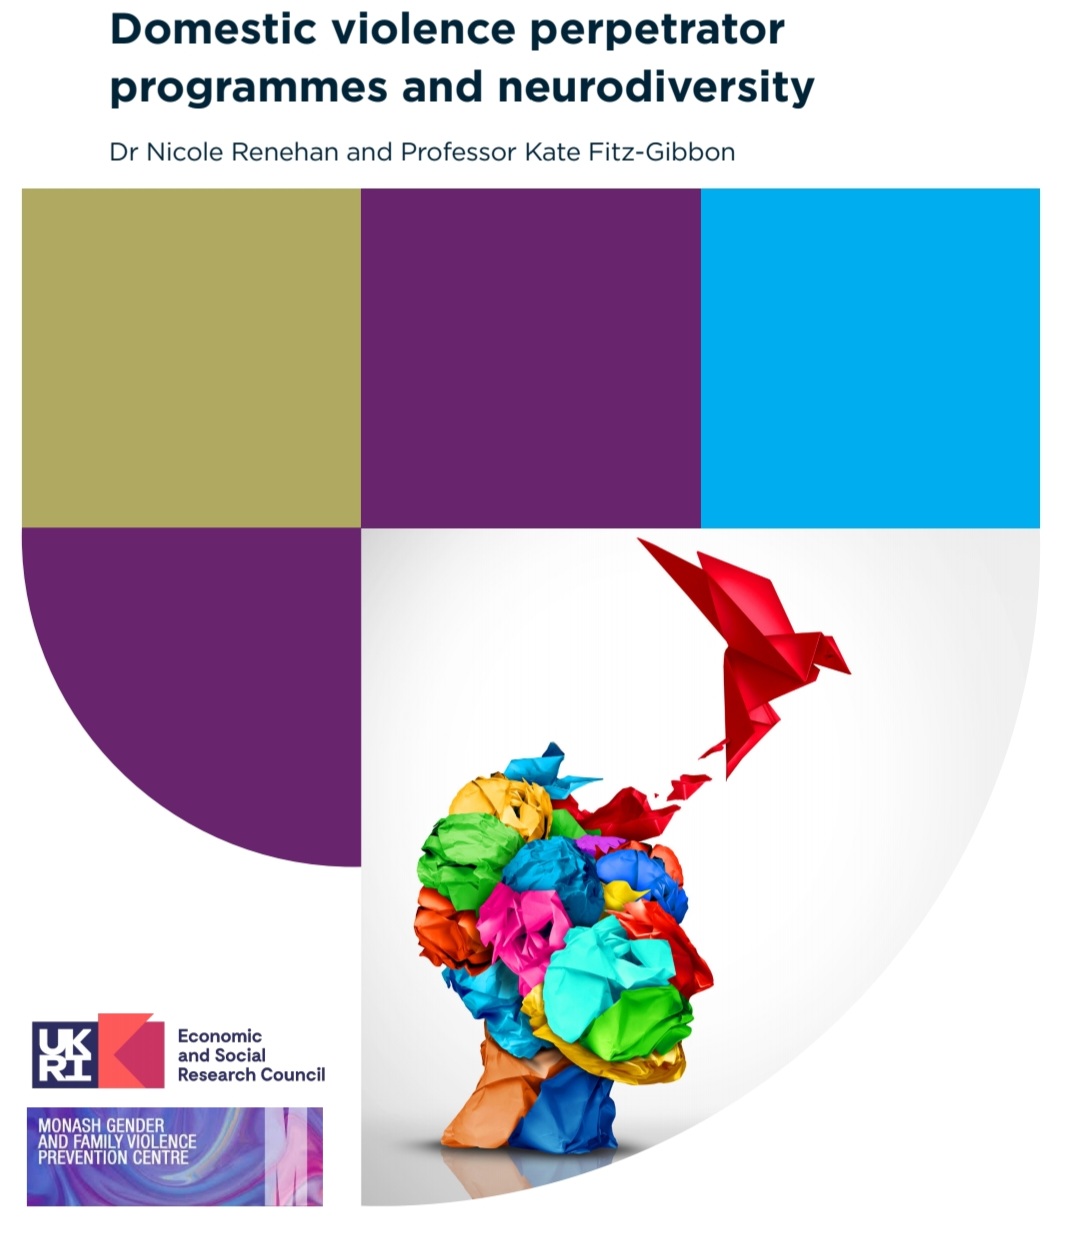 Responding to neurodiversity: how can we make perpetrator programmes more responsive?